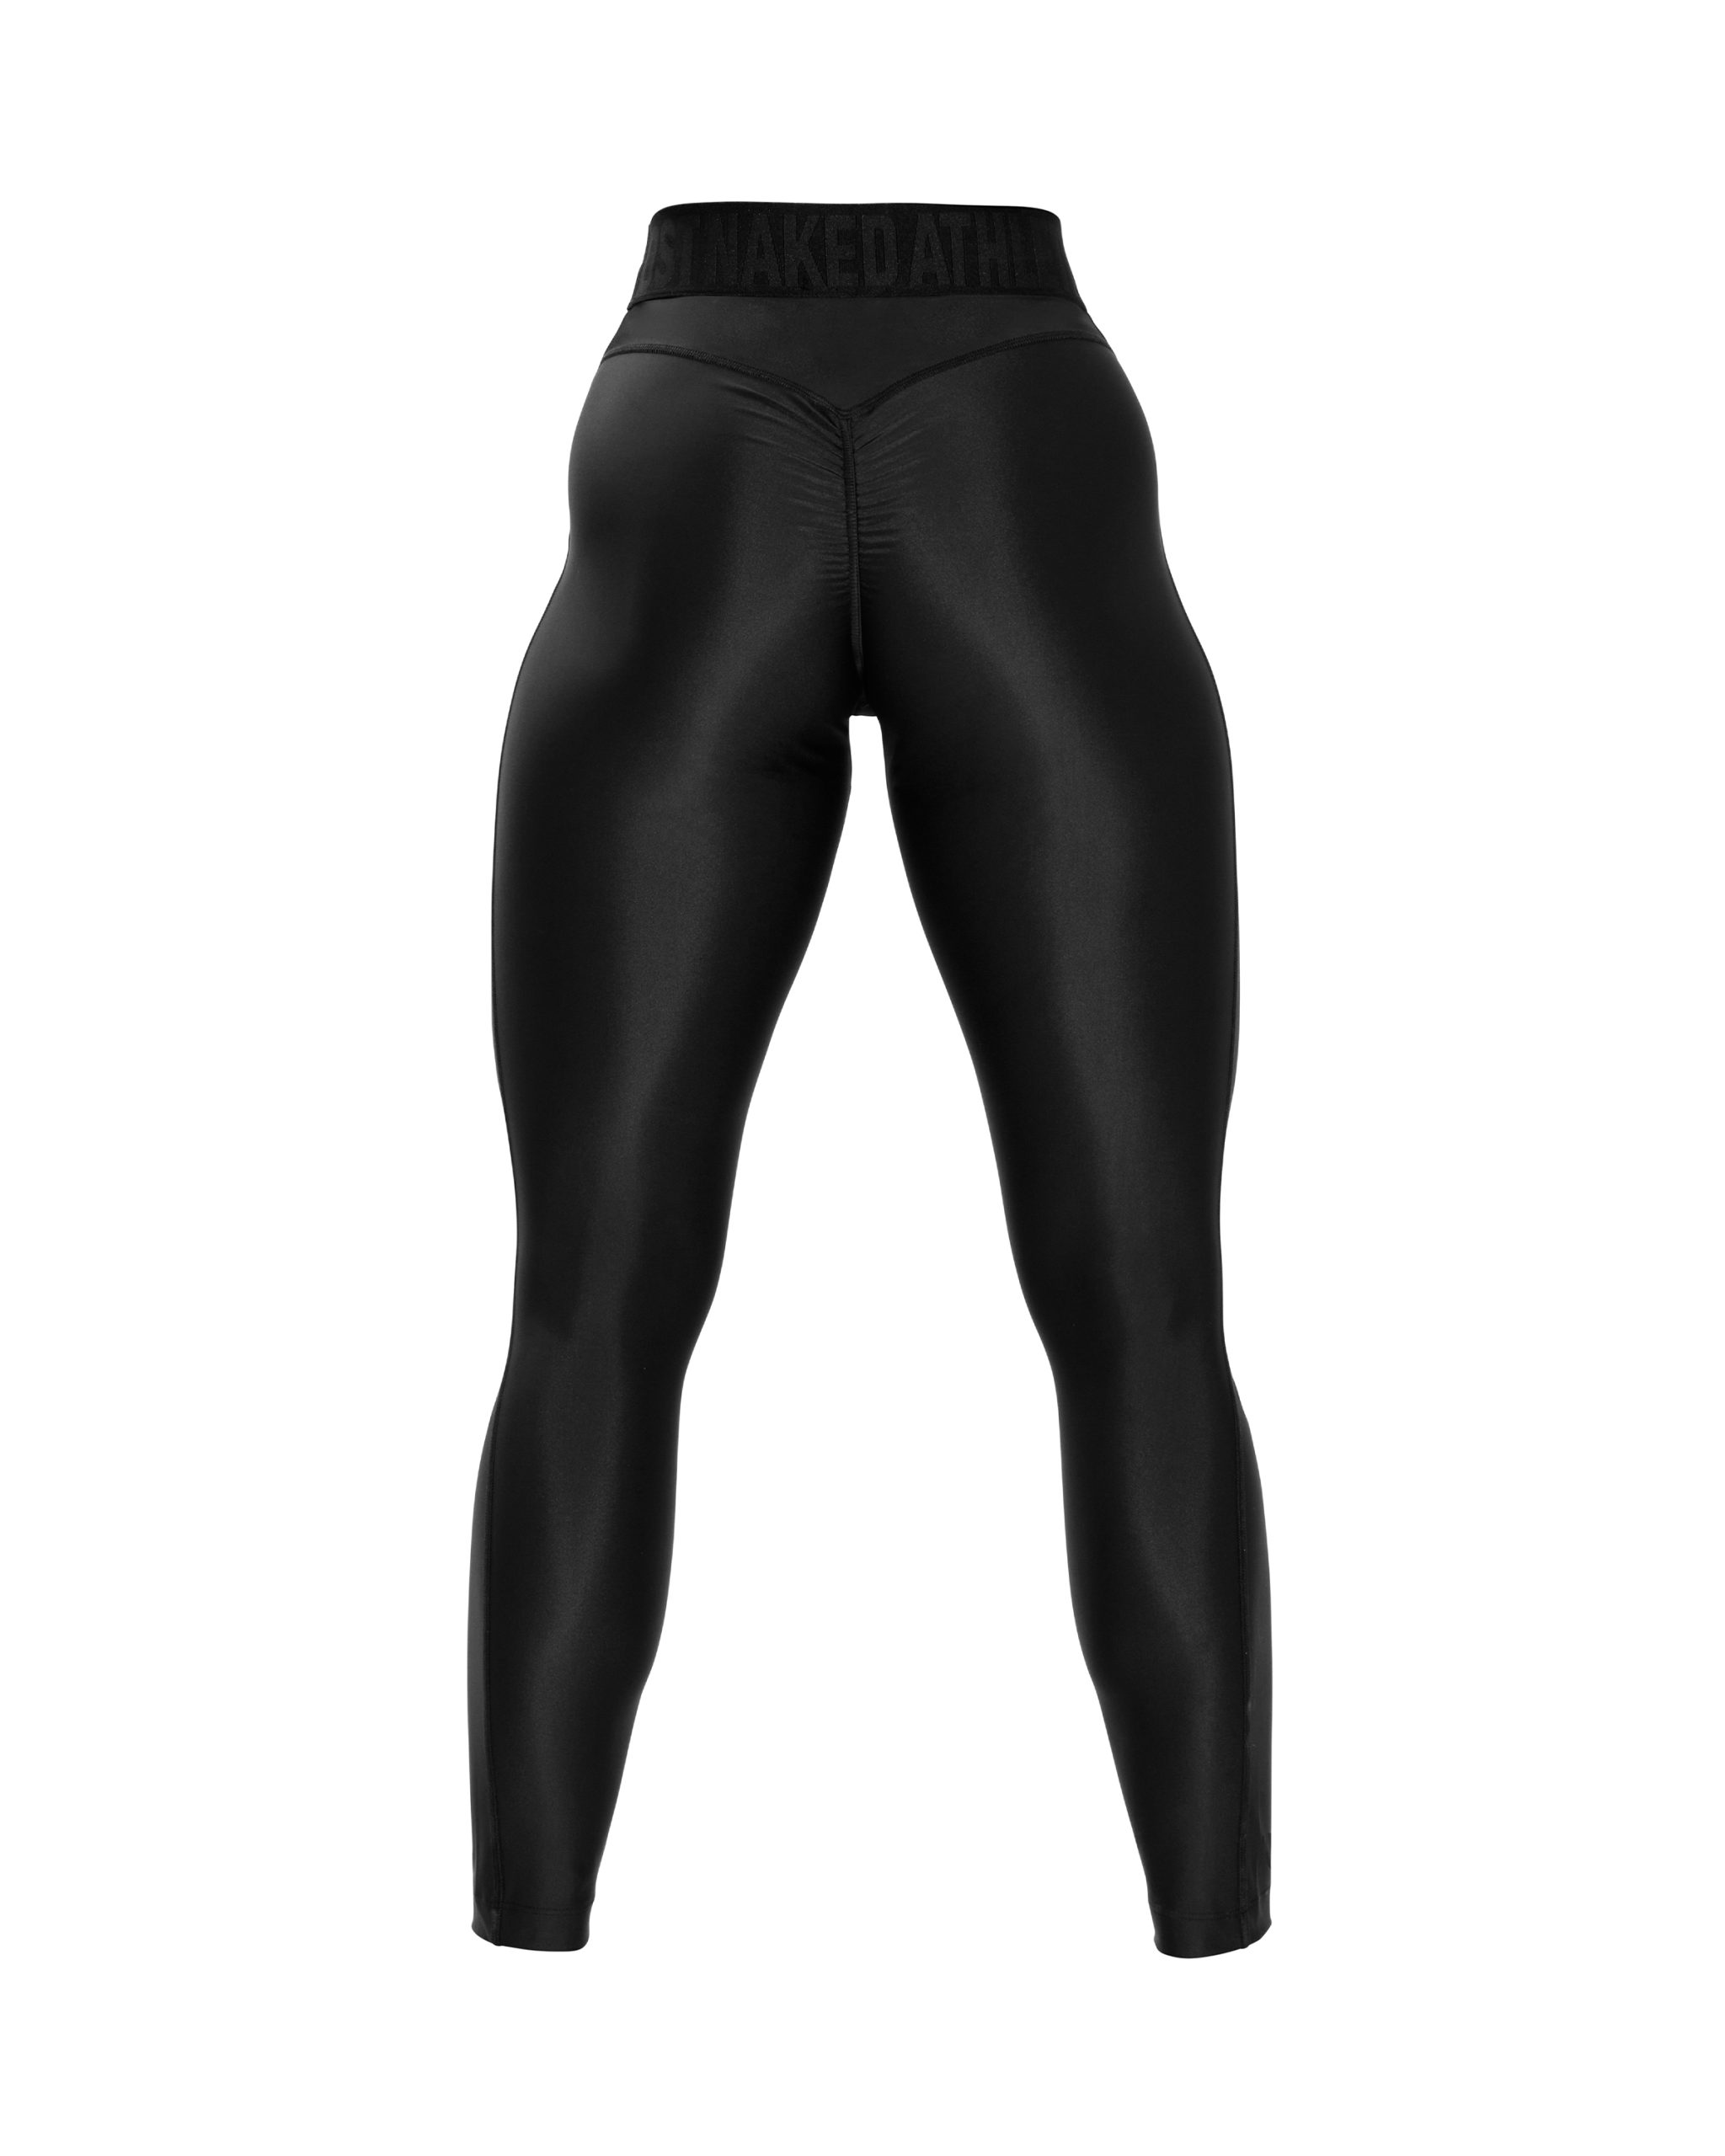 Black womens tights all black - Almost Naked Athletics